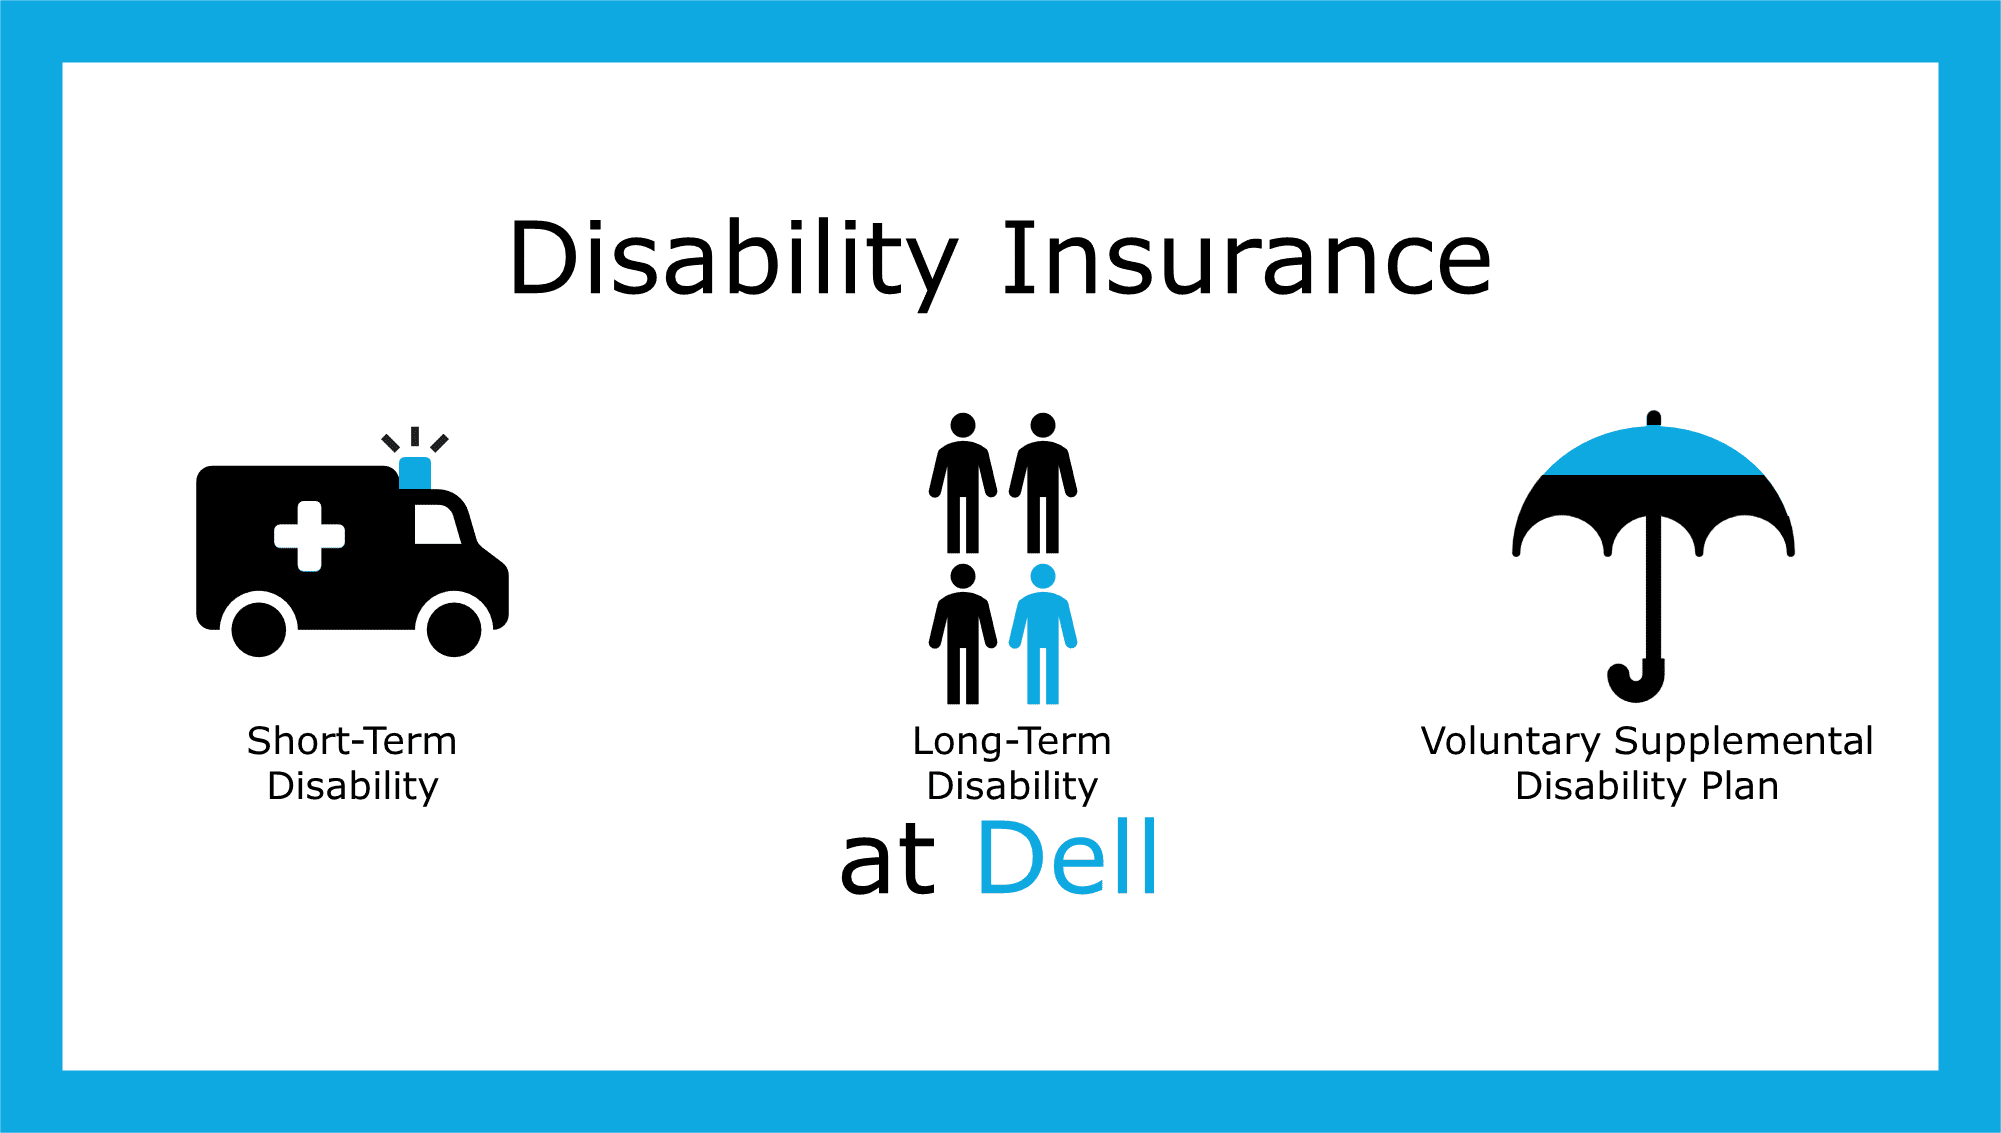 Disability Insurance at Dell